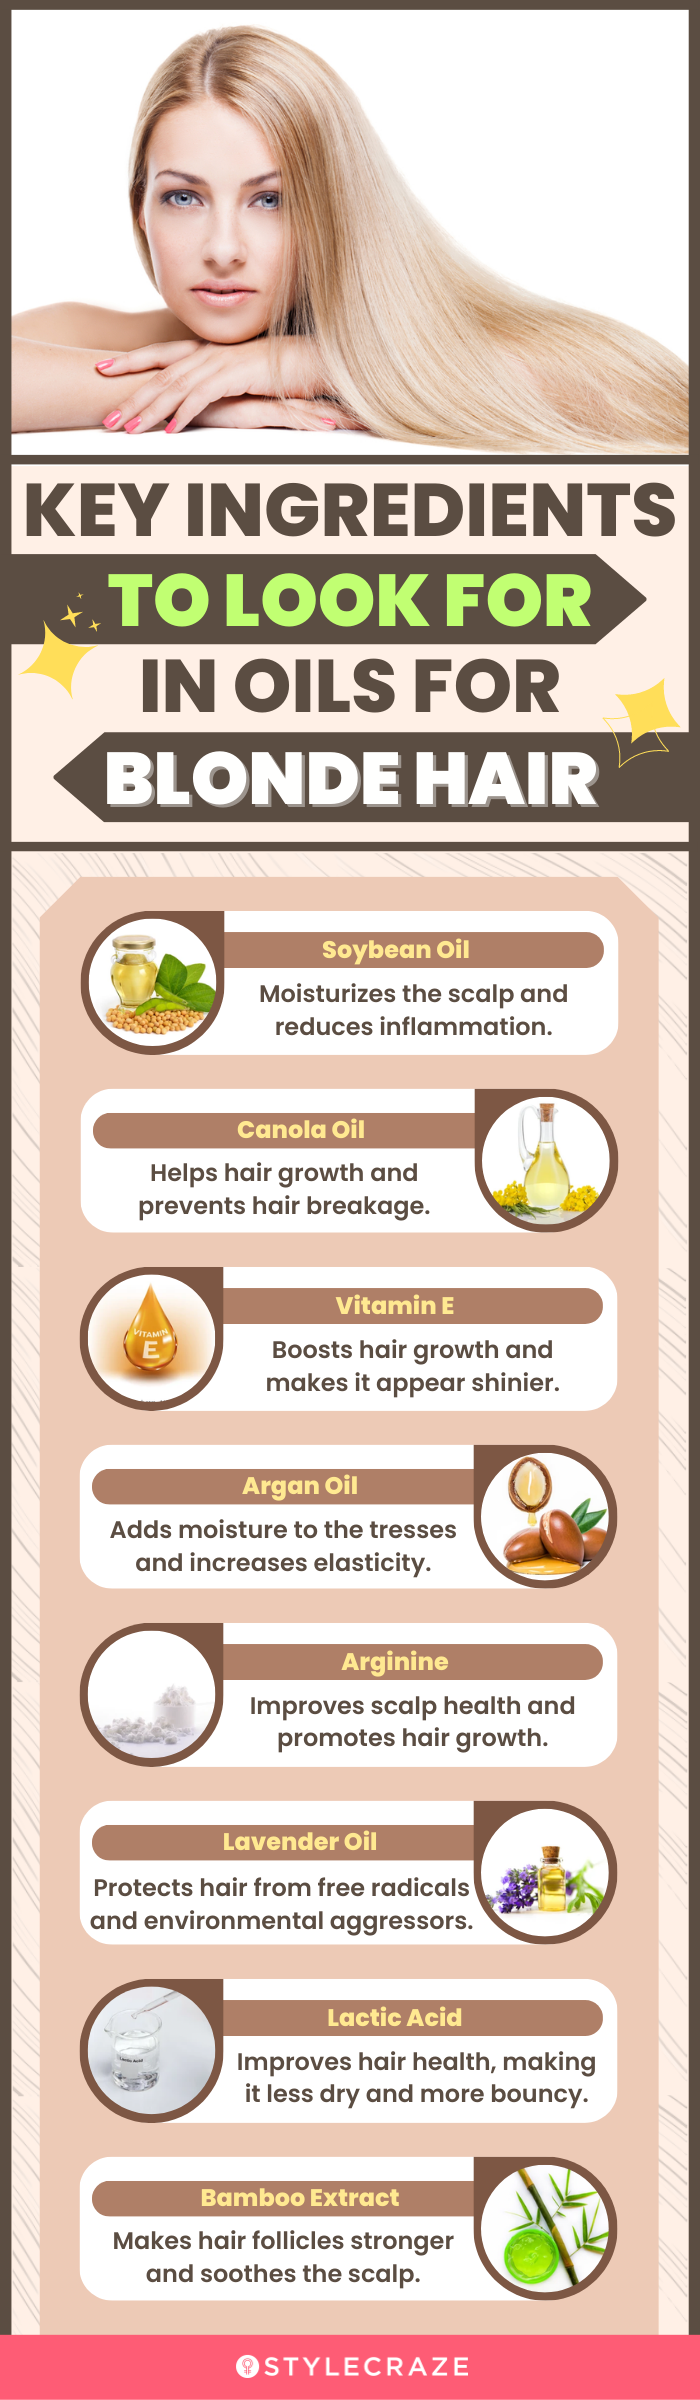 Key Ingredients To Look For In Oils For Blonde Hair (infographic)